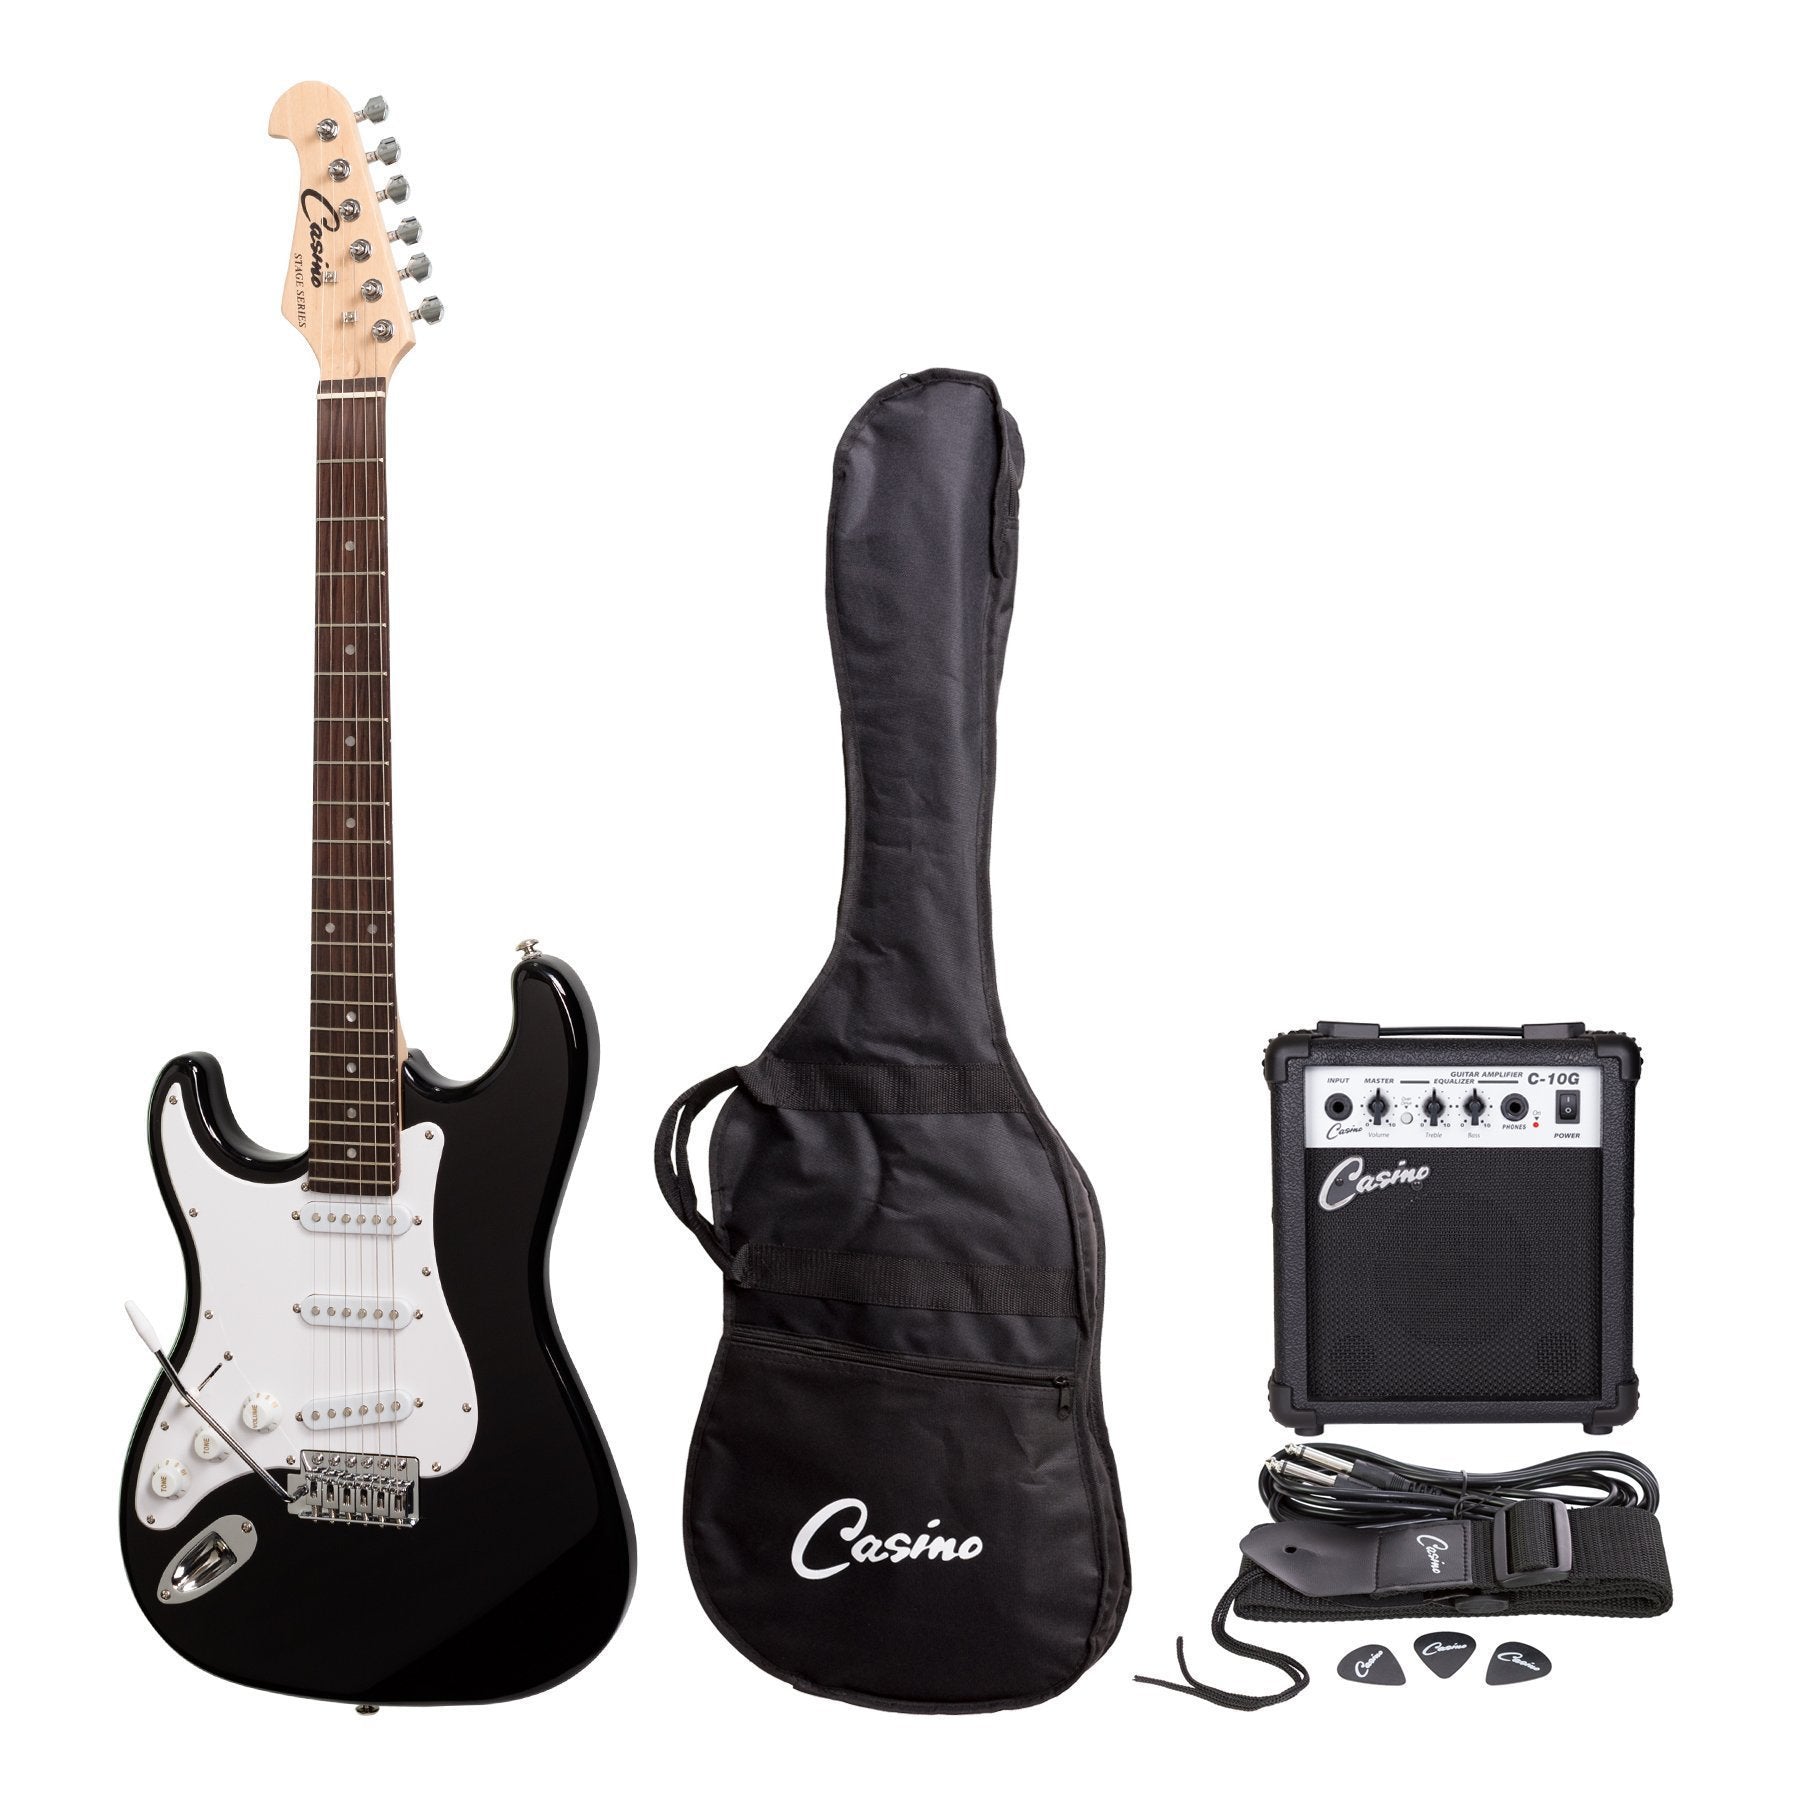 Casino ST-Style Left Handed Electric Guitar and 10 Watt Amplifier Pack (Black)-CP-E5L-BLK